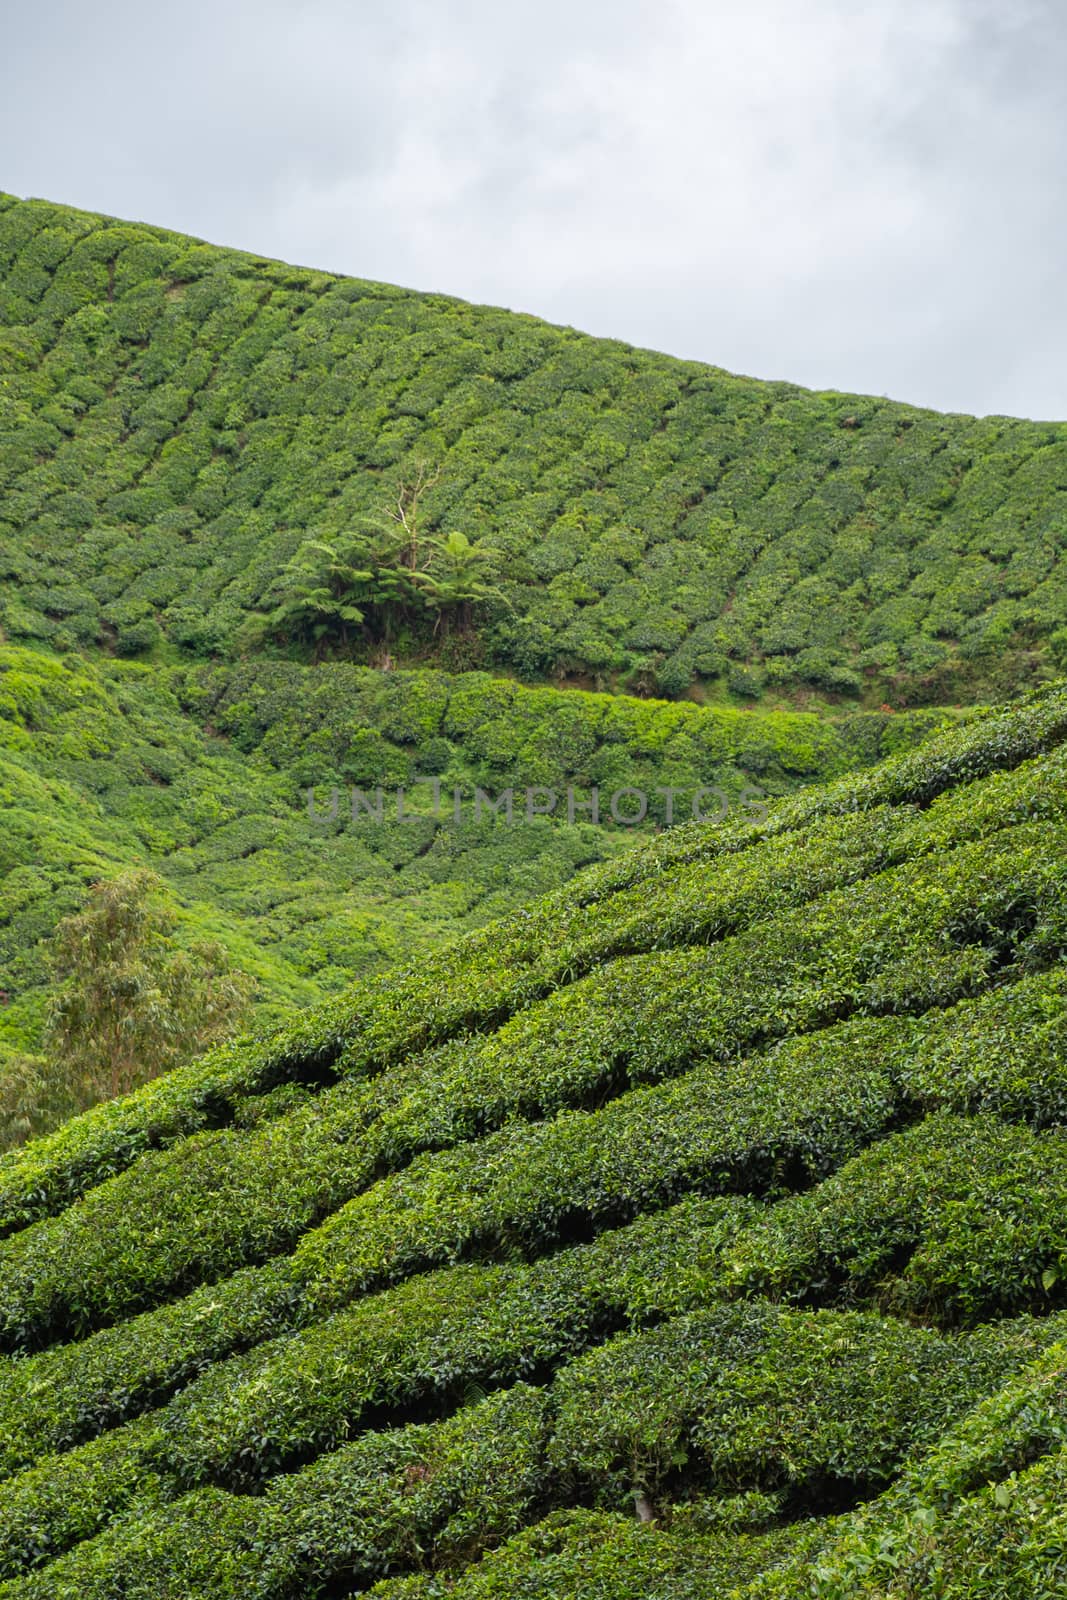 Tea plantation rows of camellia sinensis covering hill slopes